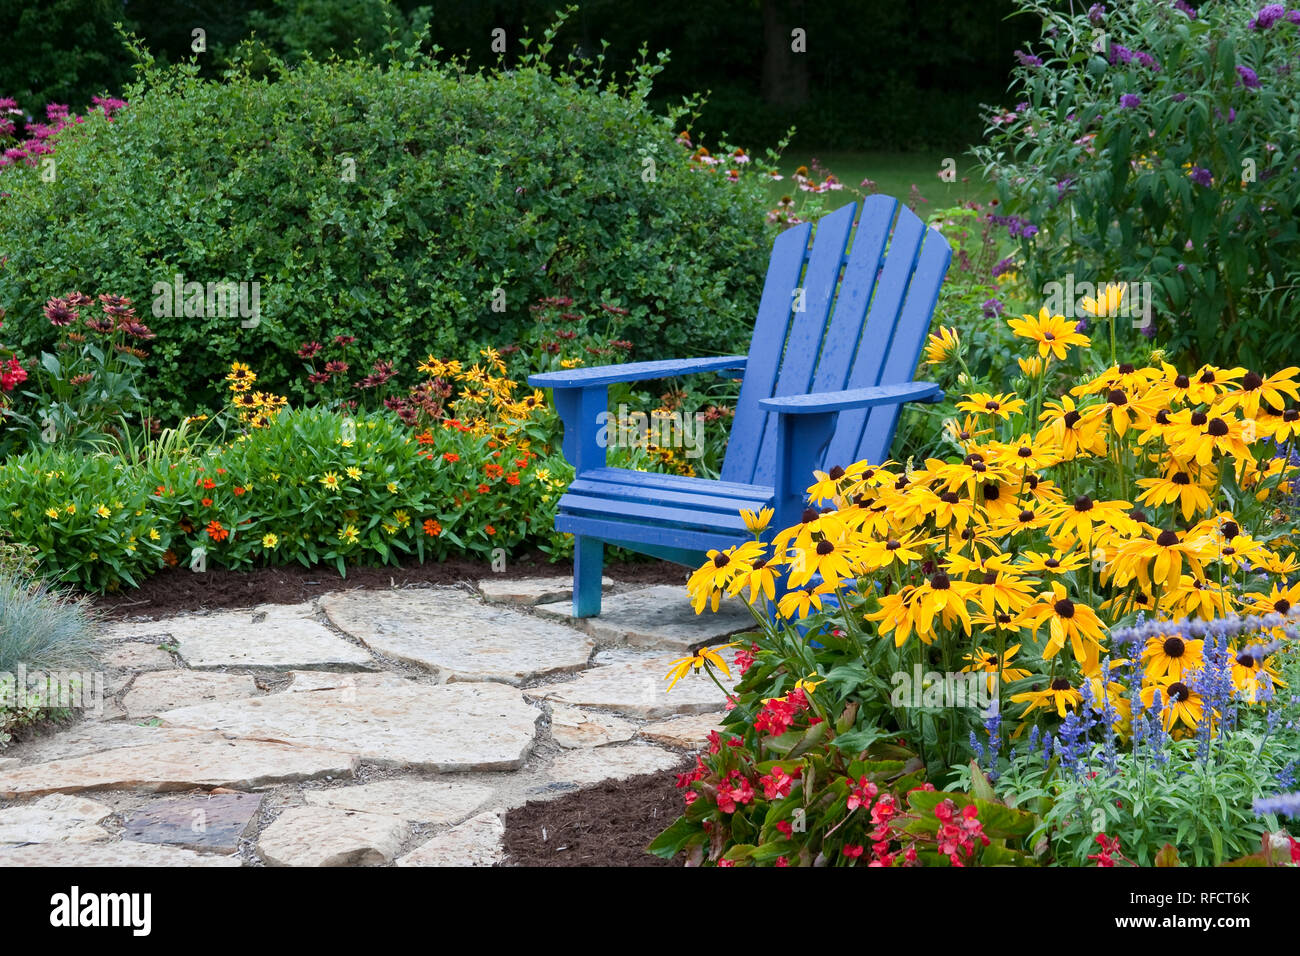 63821-21909 Flower garden with blue Adirondack chair and stone path.  Black-eyed Susans (Rudbeckia hirta)  Red Dragon Wing Begonias, zinnias, Blue Vic Stock Photo